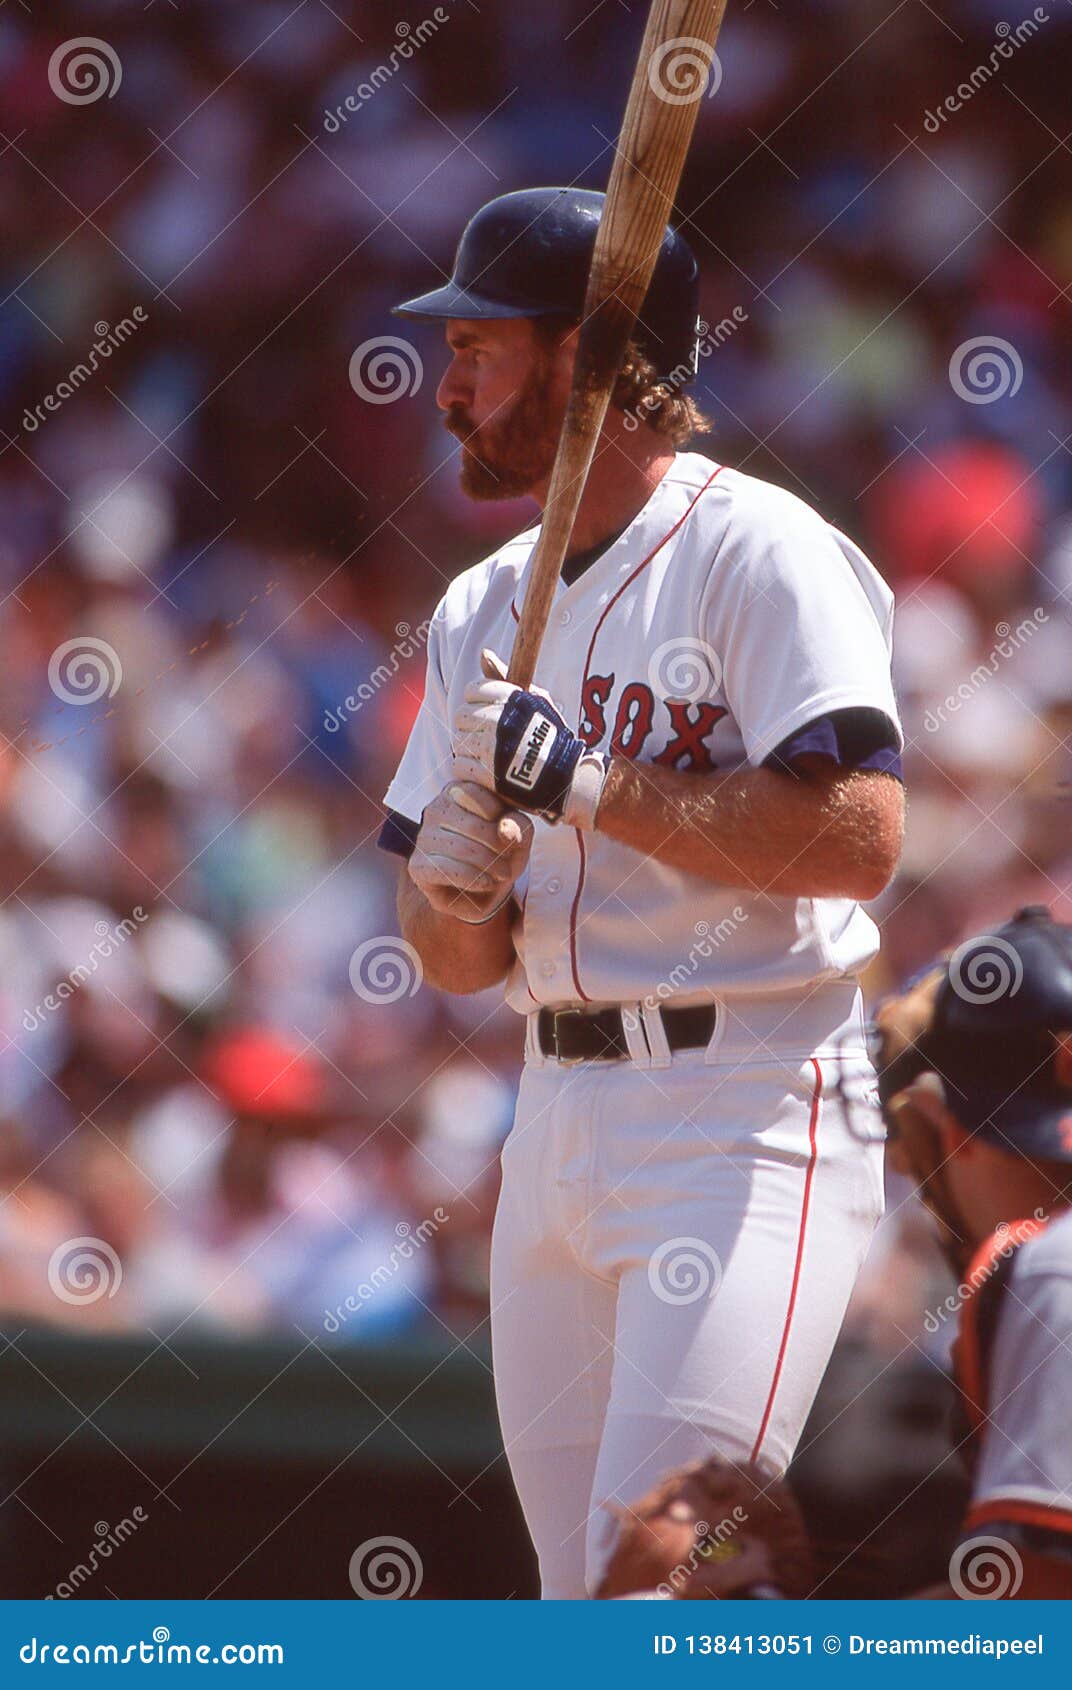 wade boggs today